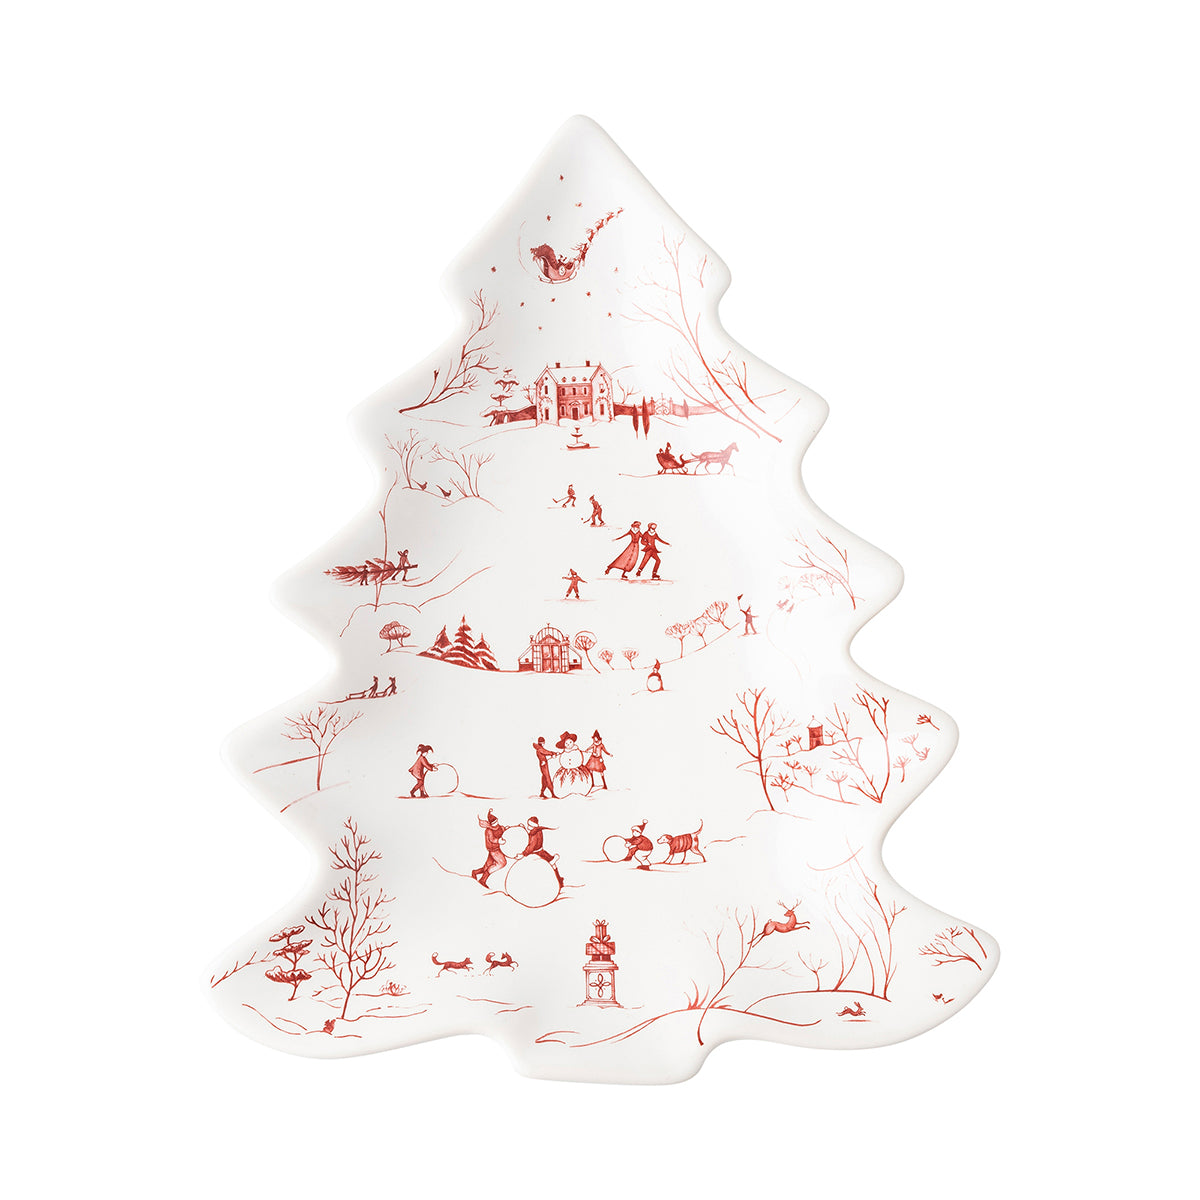 Country Estate Winter Frolic Small Tree Tray